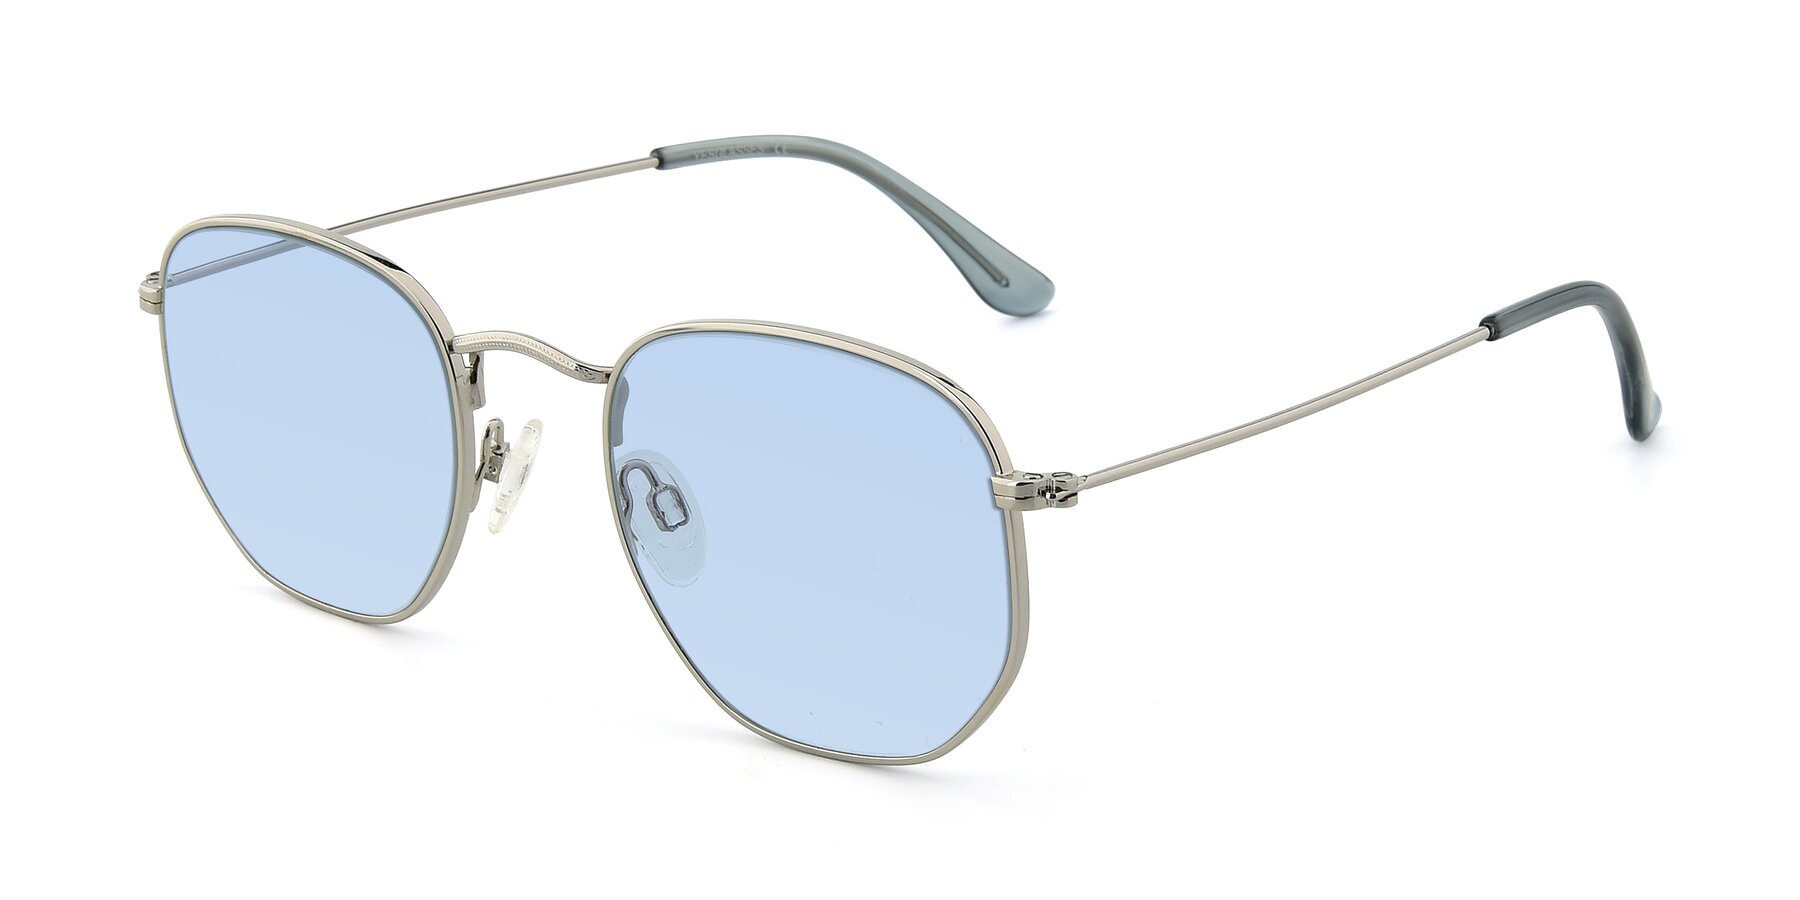 Angle of SSR1944 in Silver with Light Blue Tinted Lenses